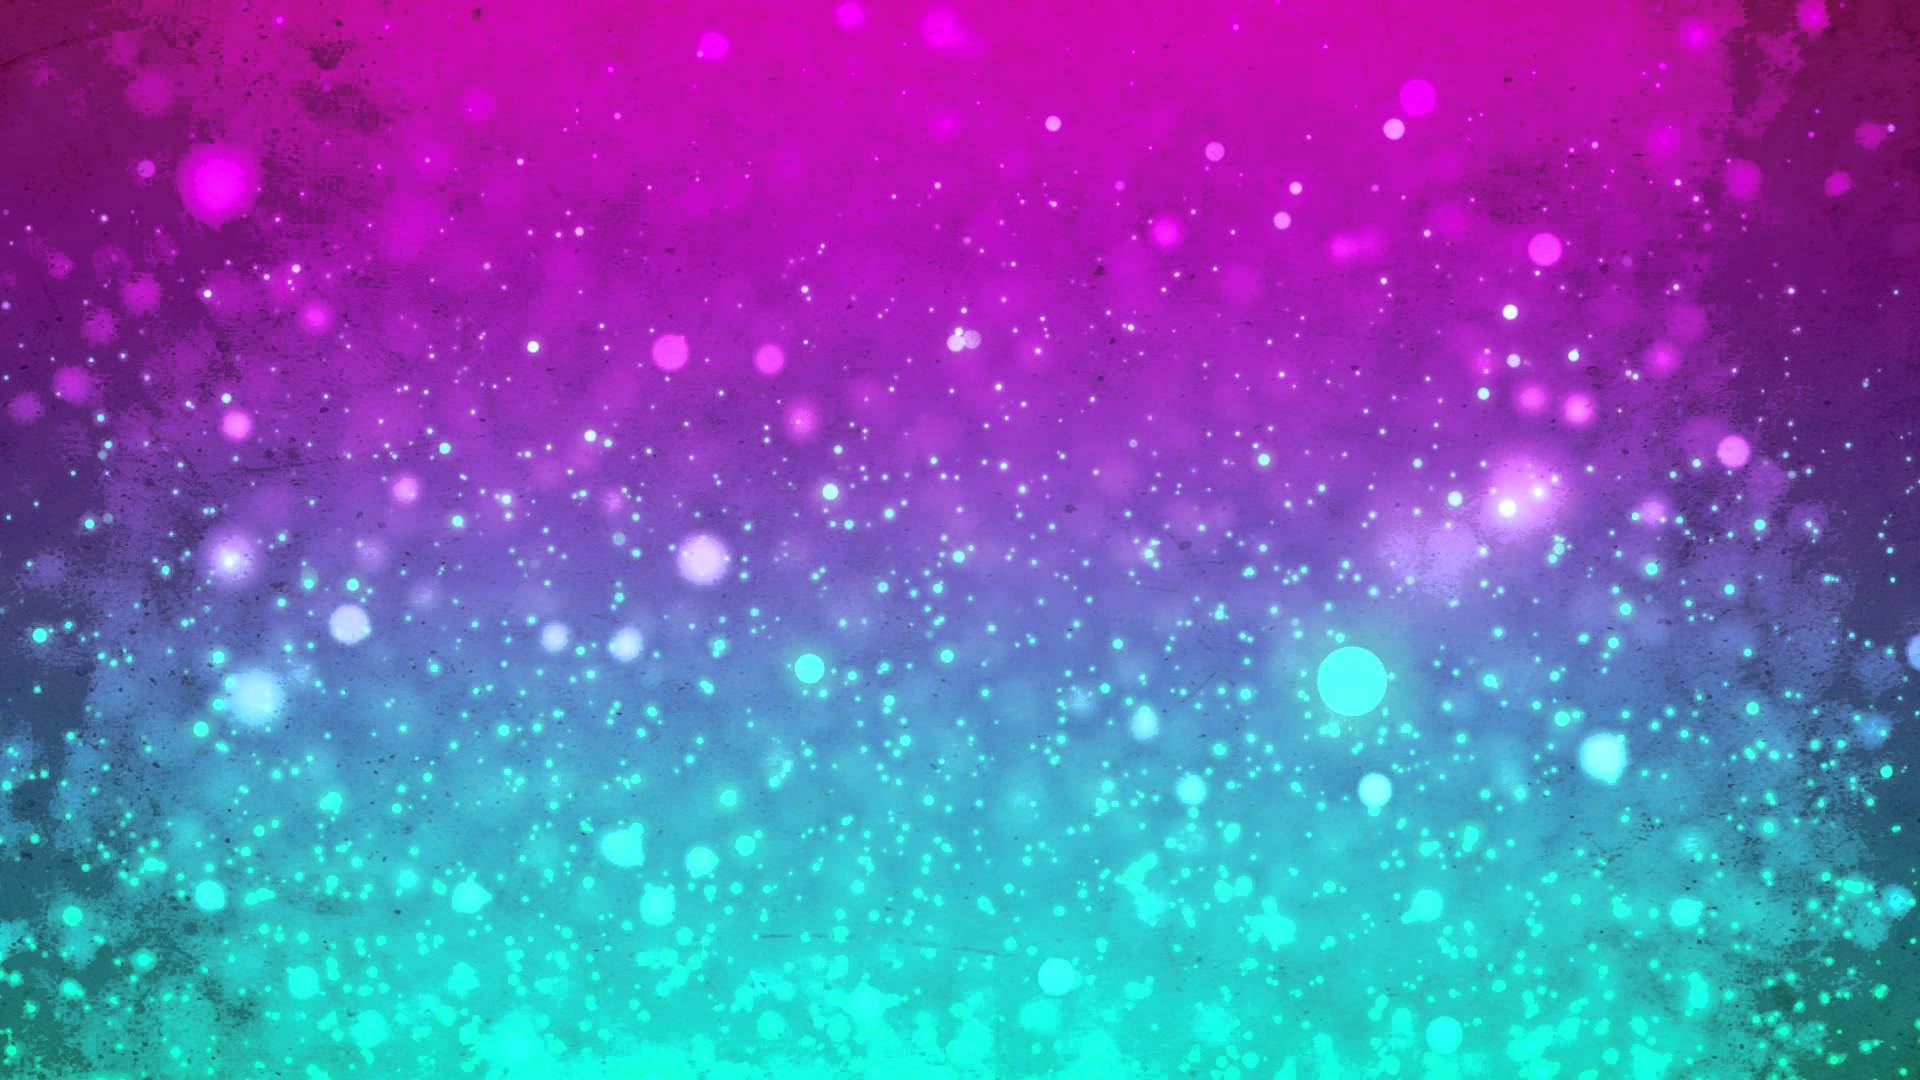 Sparkly Fondo De Pantalla - Cool Backgrounds For Youtube For Girls , HD Wallpaper & Backgrounds